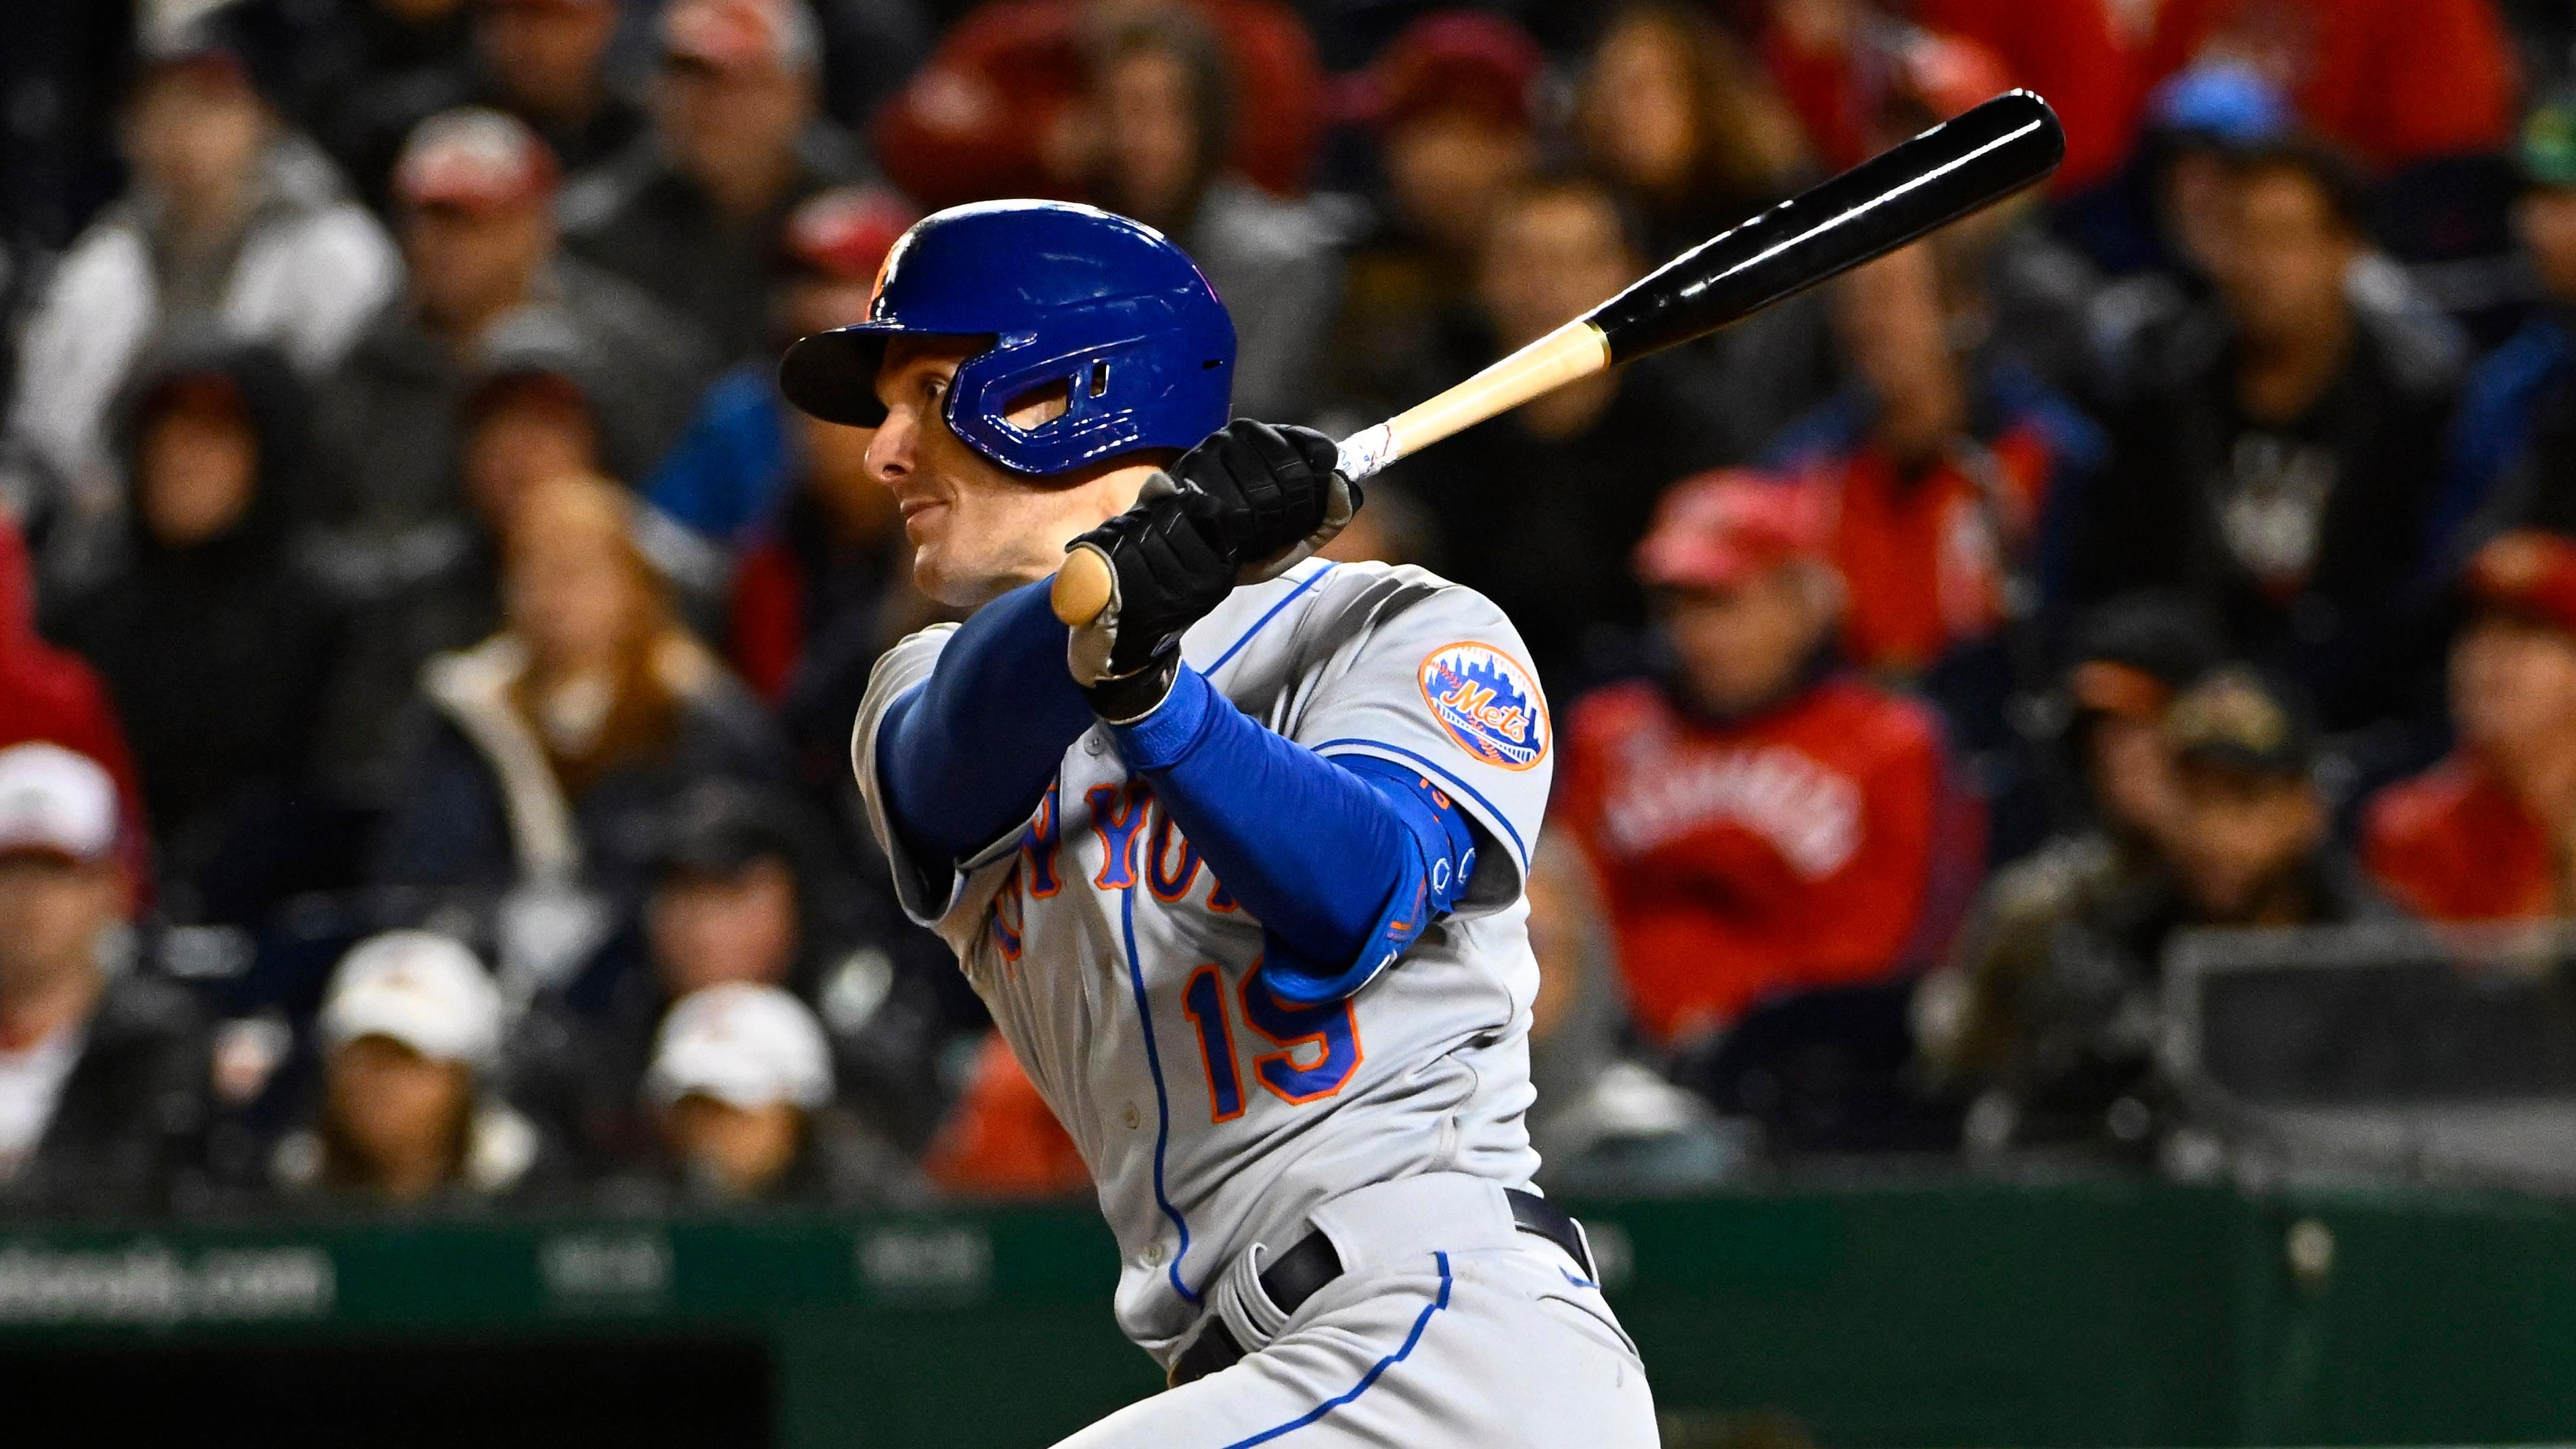 Mets OF Mark Canha / Brad Mills-USA TODAY Sports